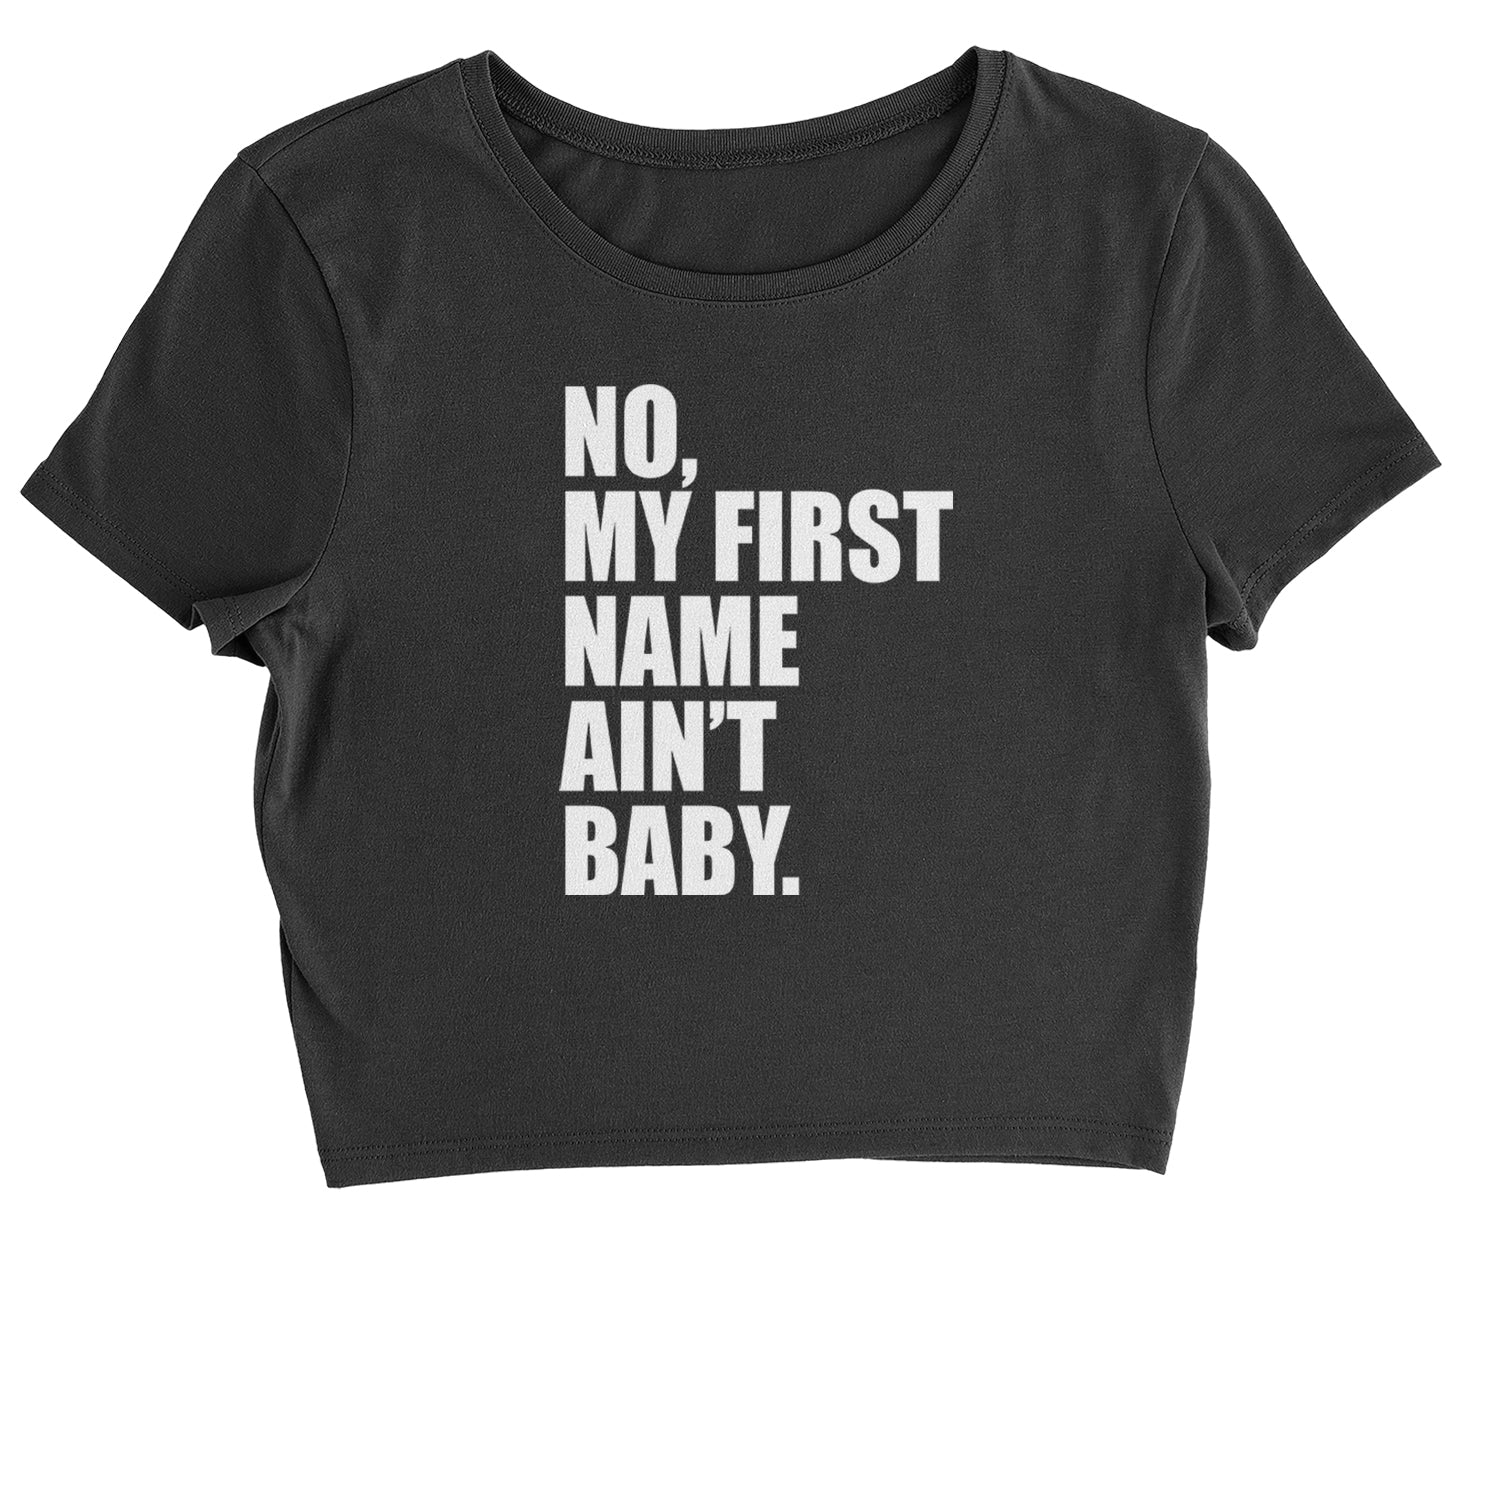 No My First Name Ain't Baby Together Again Cropped T-Shirt